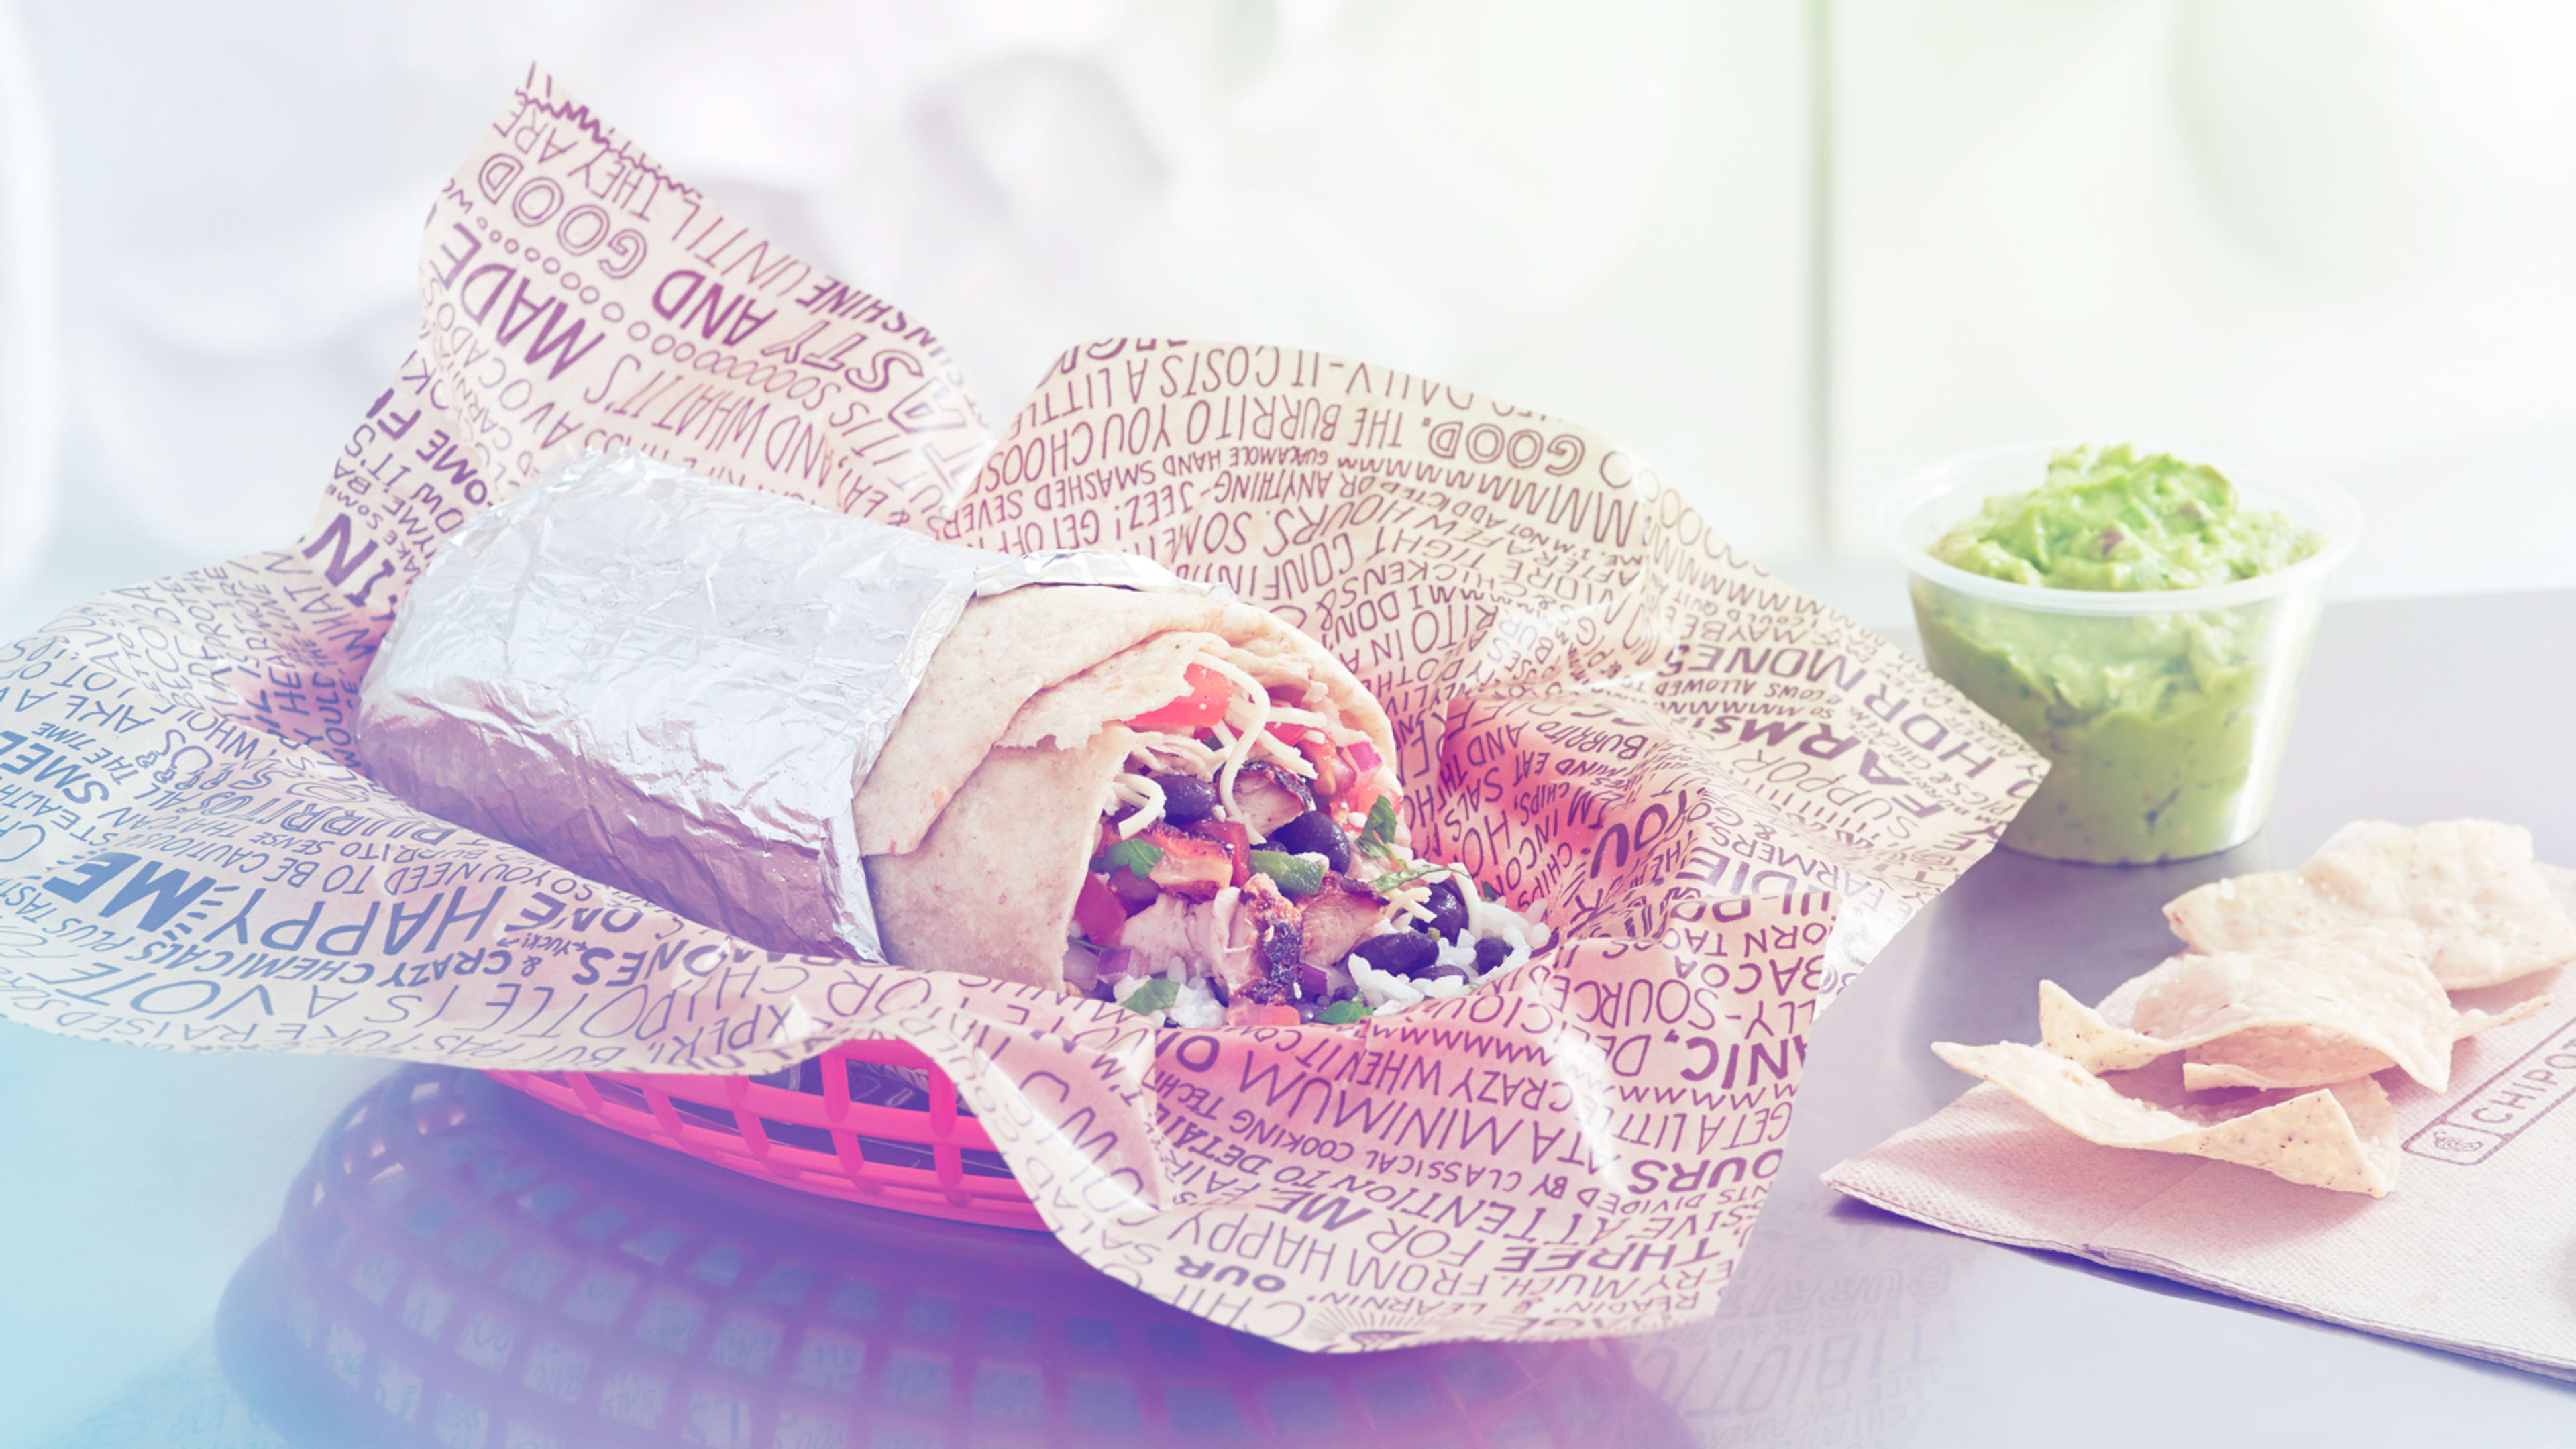 Chipotle’s app now includes burritos delivered to your door